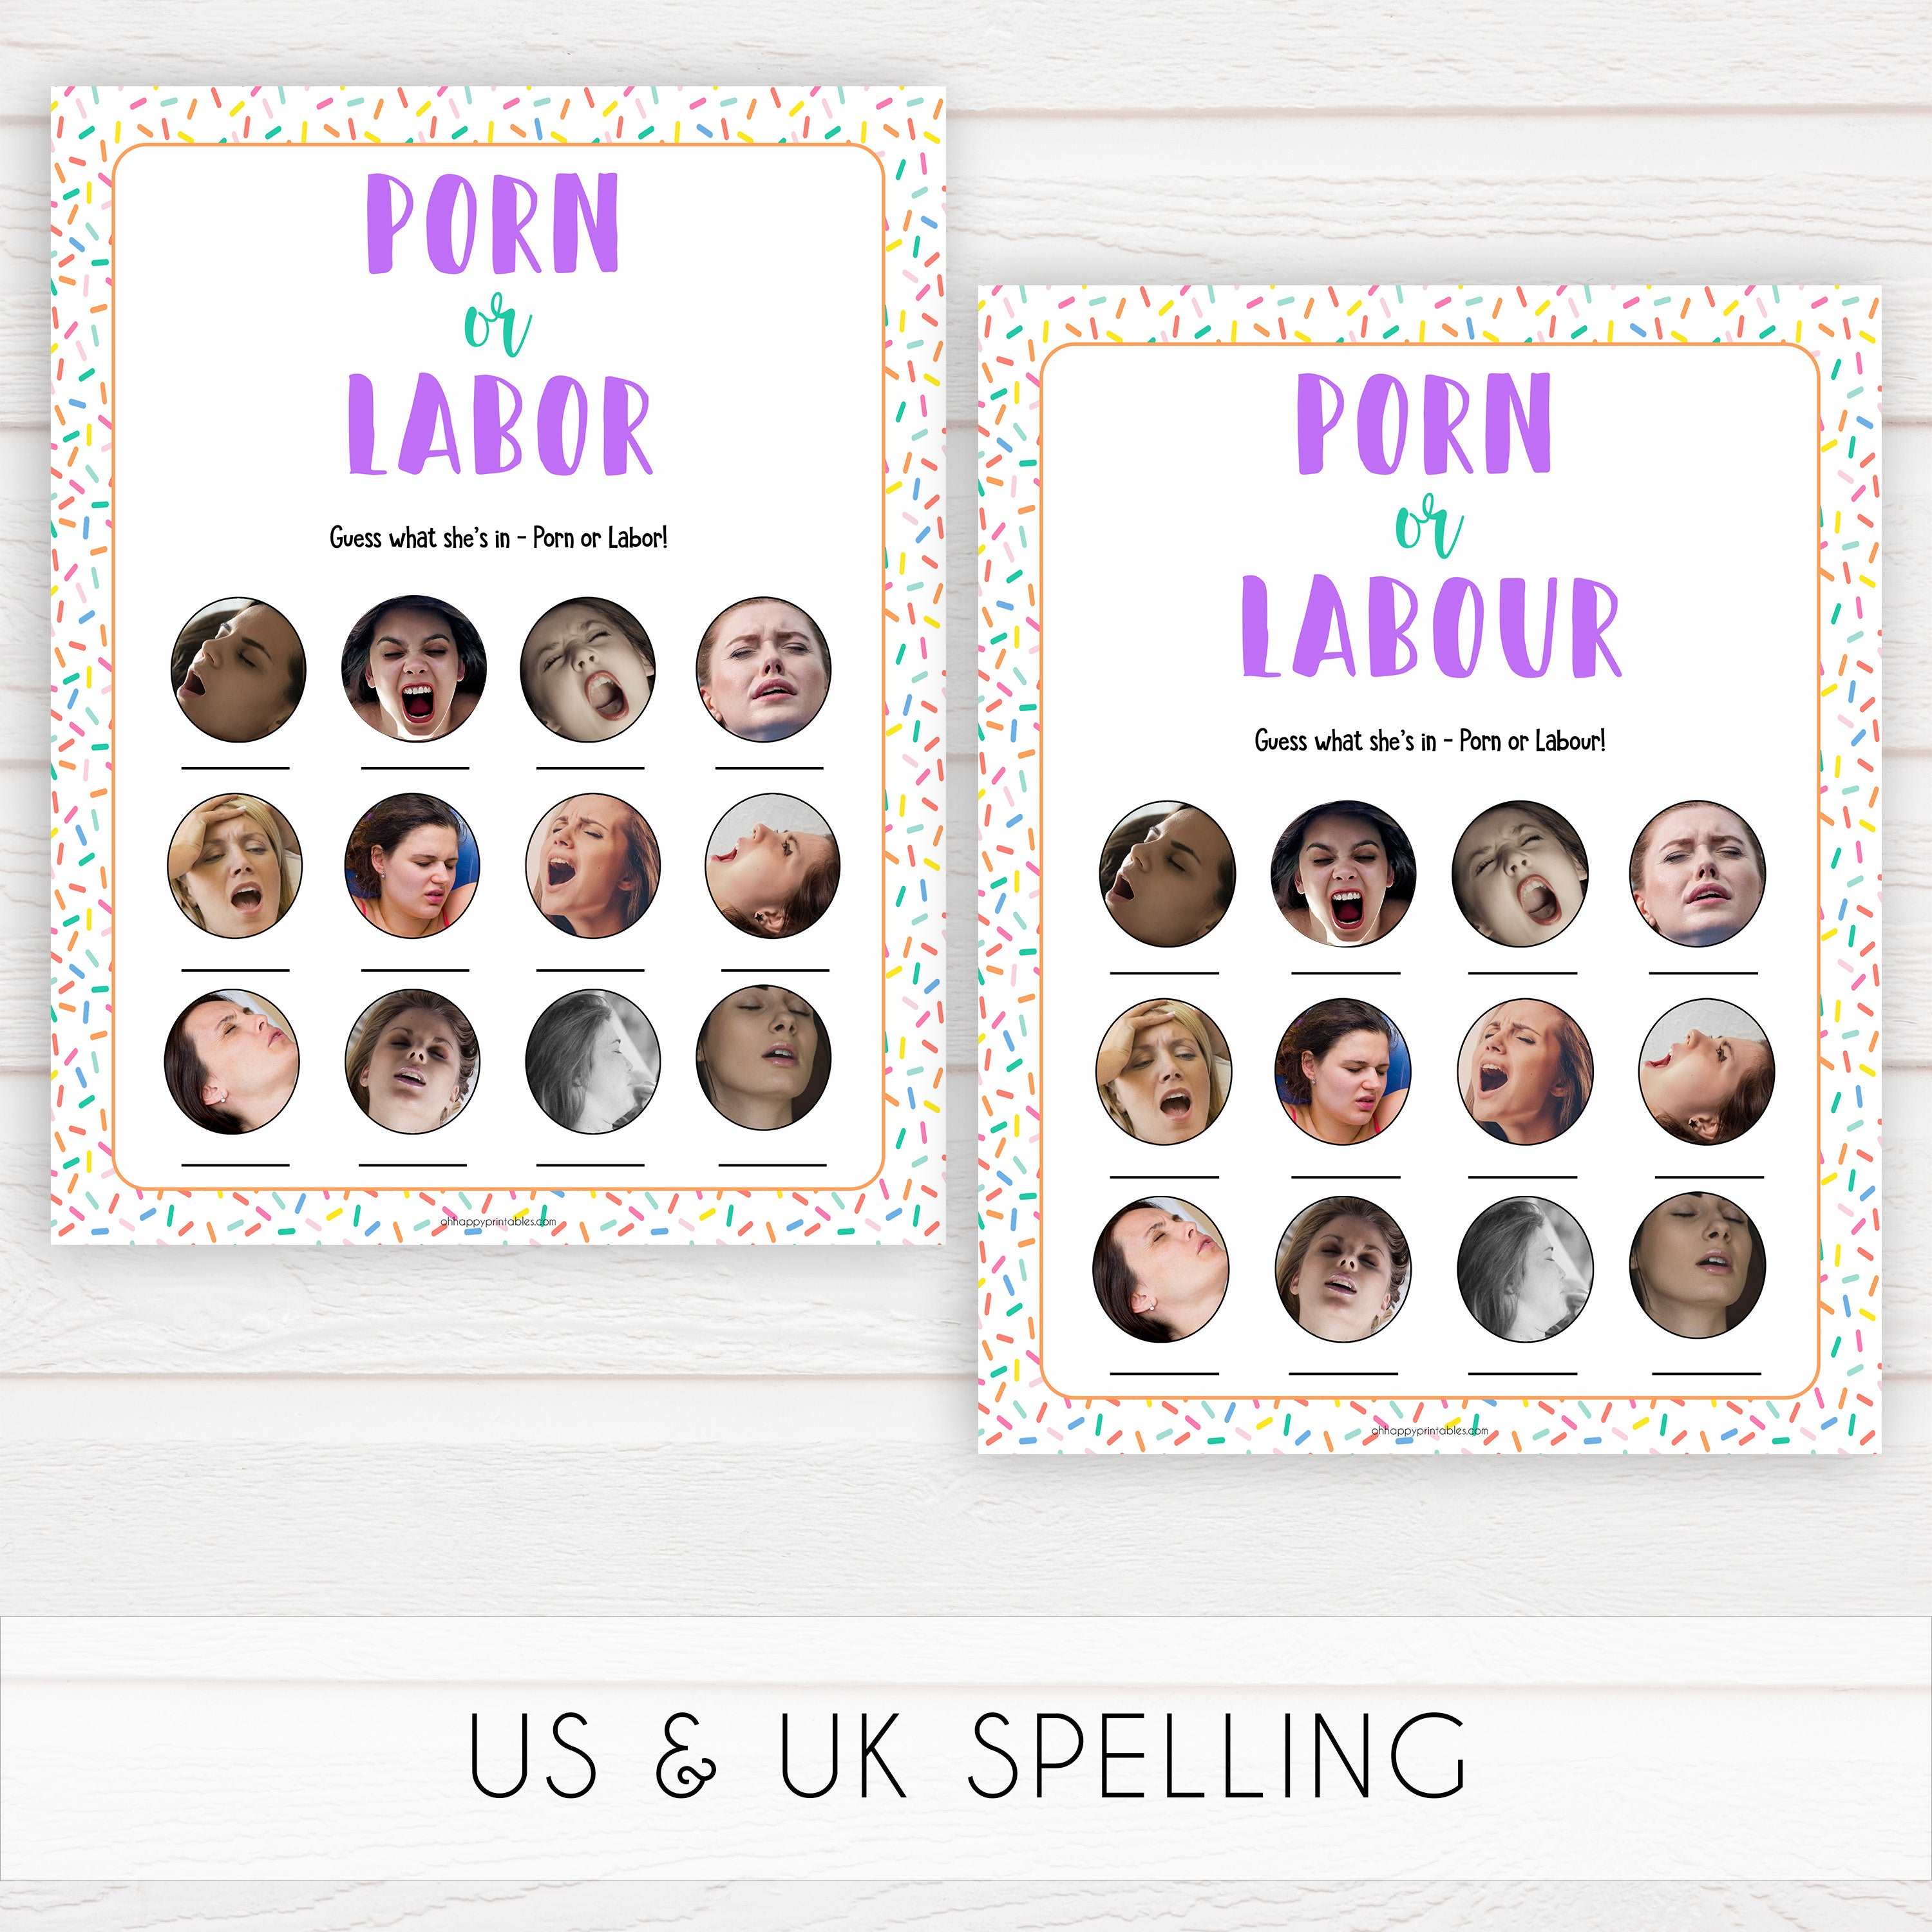 labor or porn, baby bump or beer belly, boobs or butts baby game, Printable baby shower games, baby sprinkle fun baby games, baby shower games, fun baby shower ideas, top baby shower ideas, sprinkle shower baby shower, friends baby shower ideas